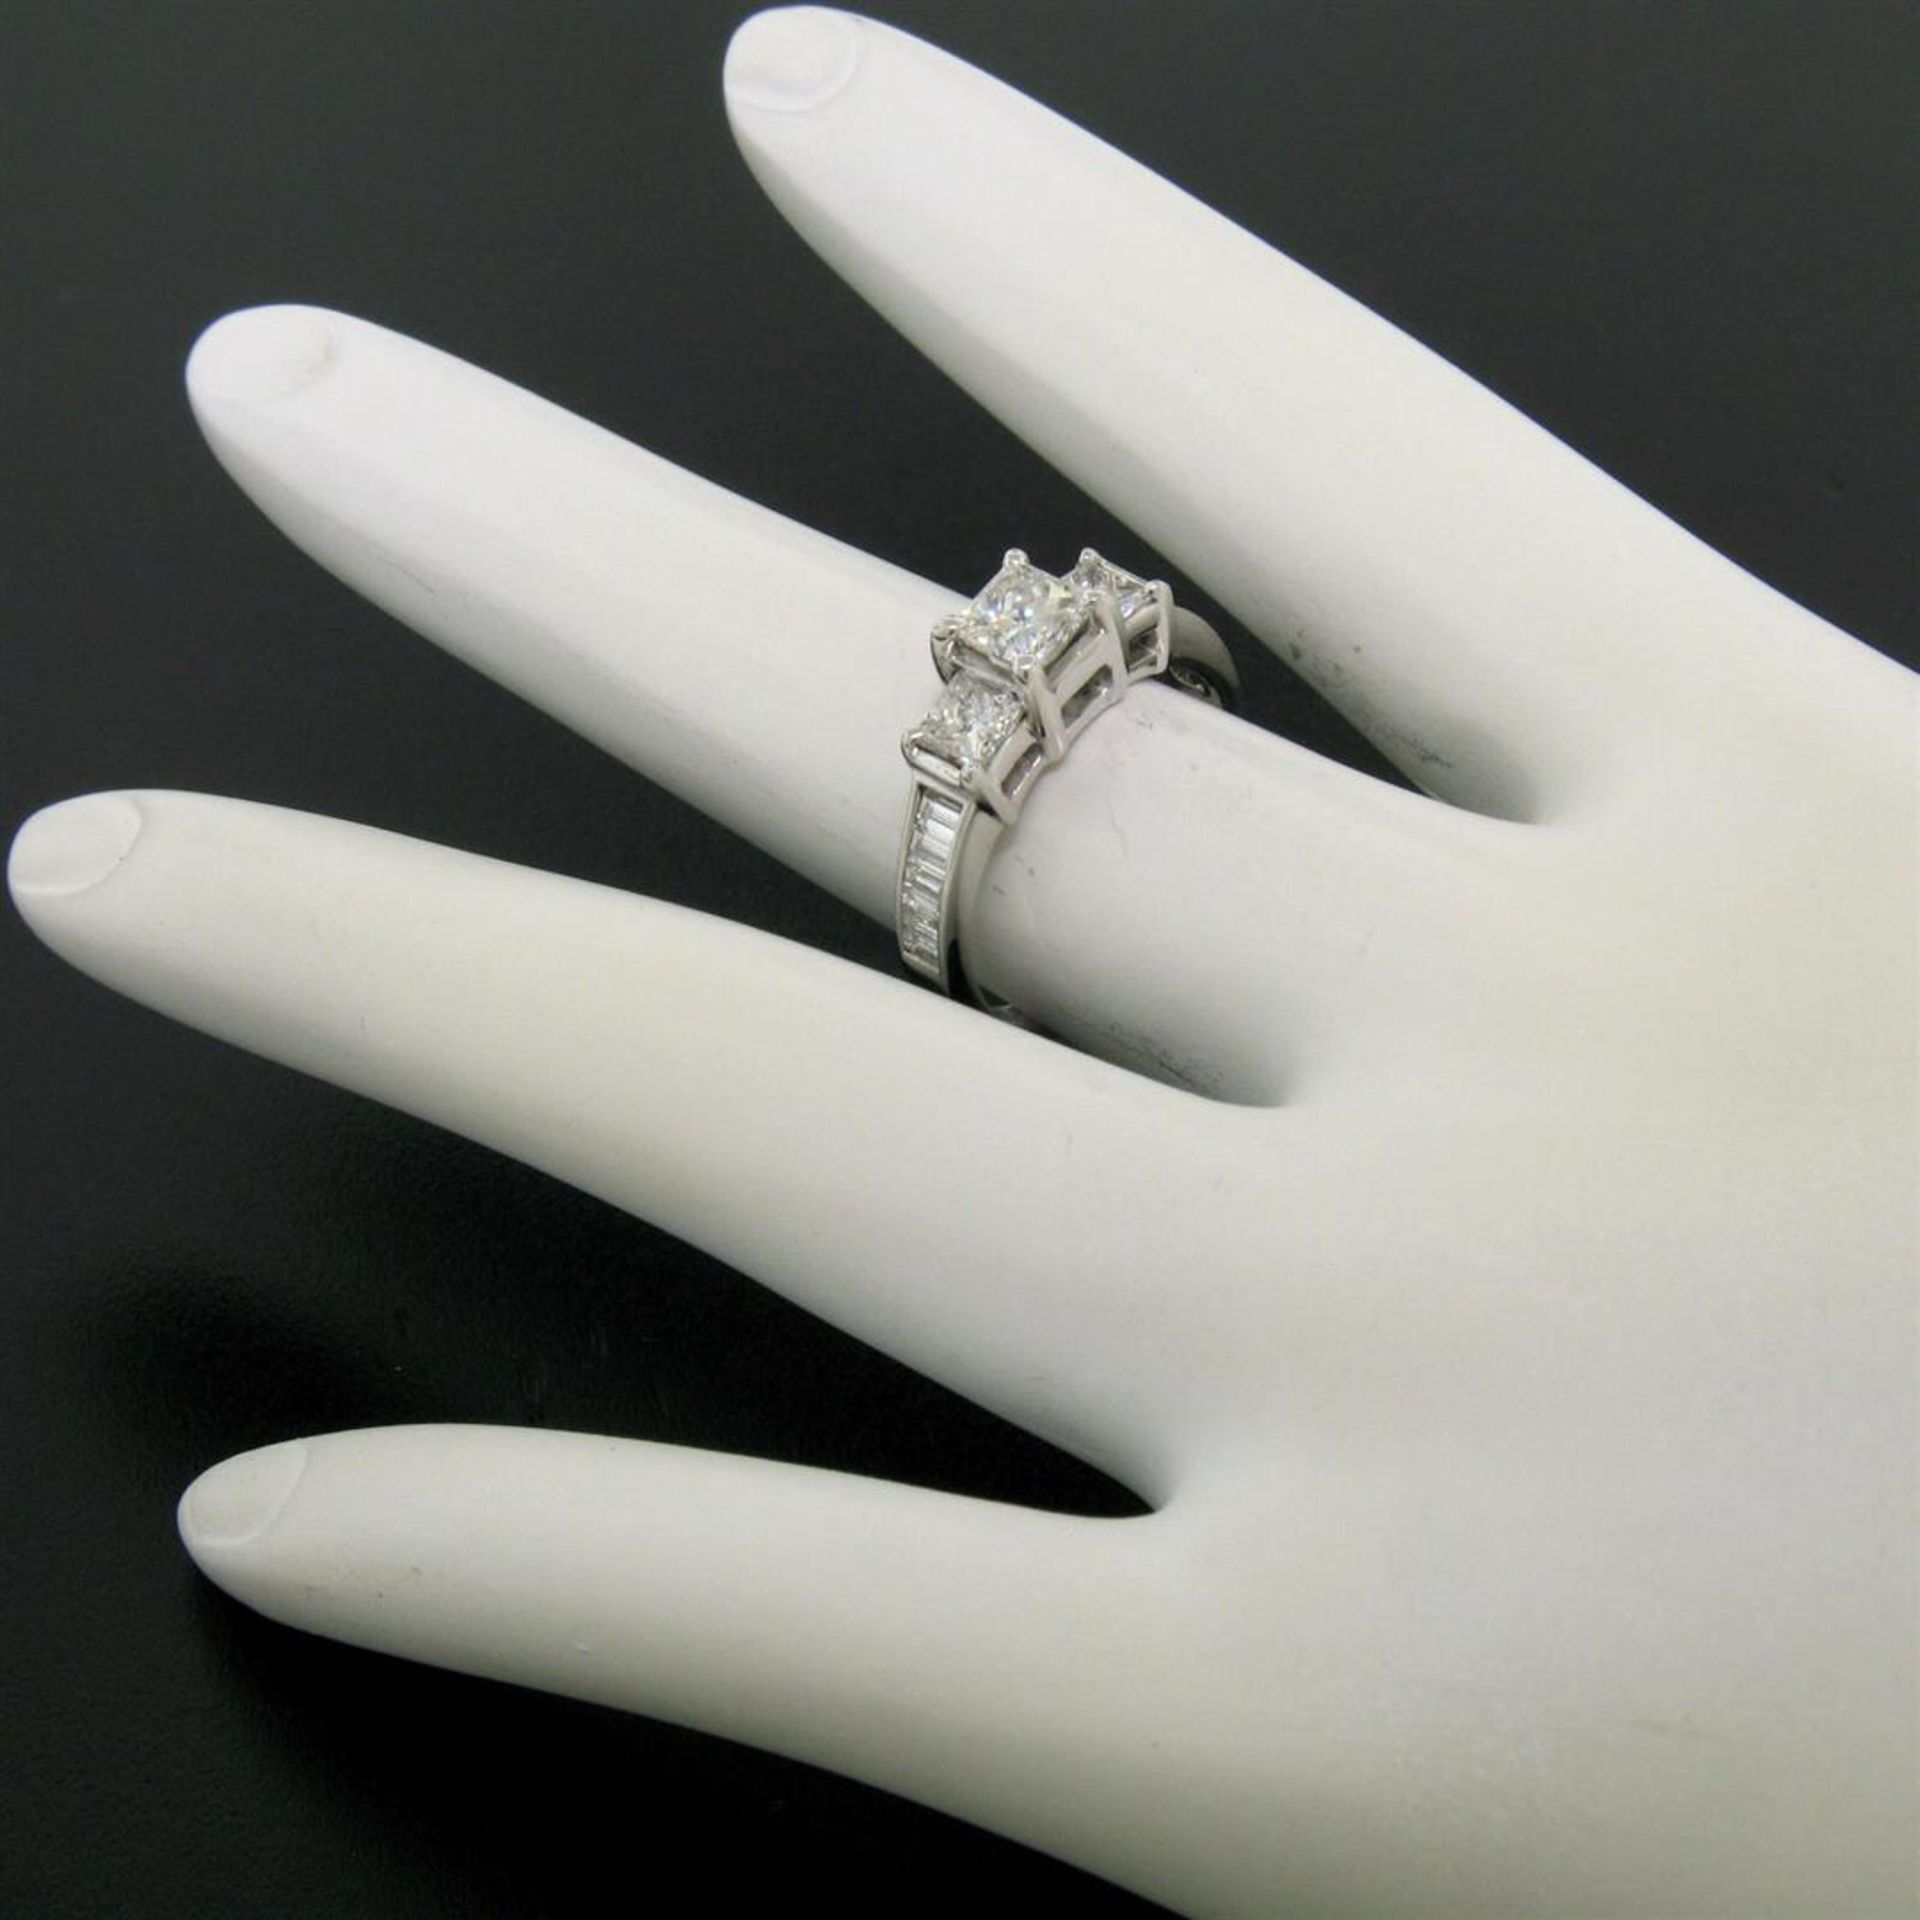 14k White Gold 1.45 ctw 3 Princess Diamond Engagement Ring w/ Baguette Accents - Image 6 of 18